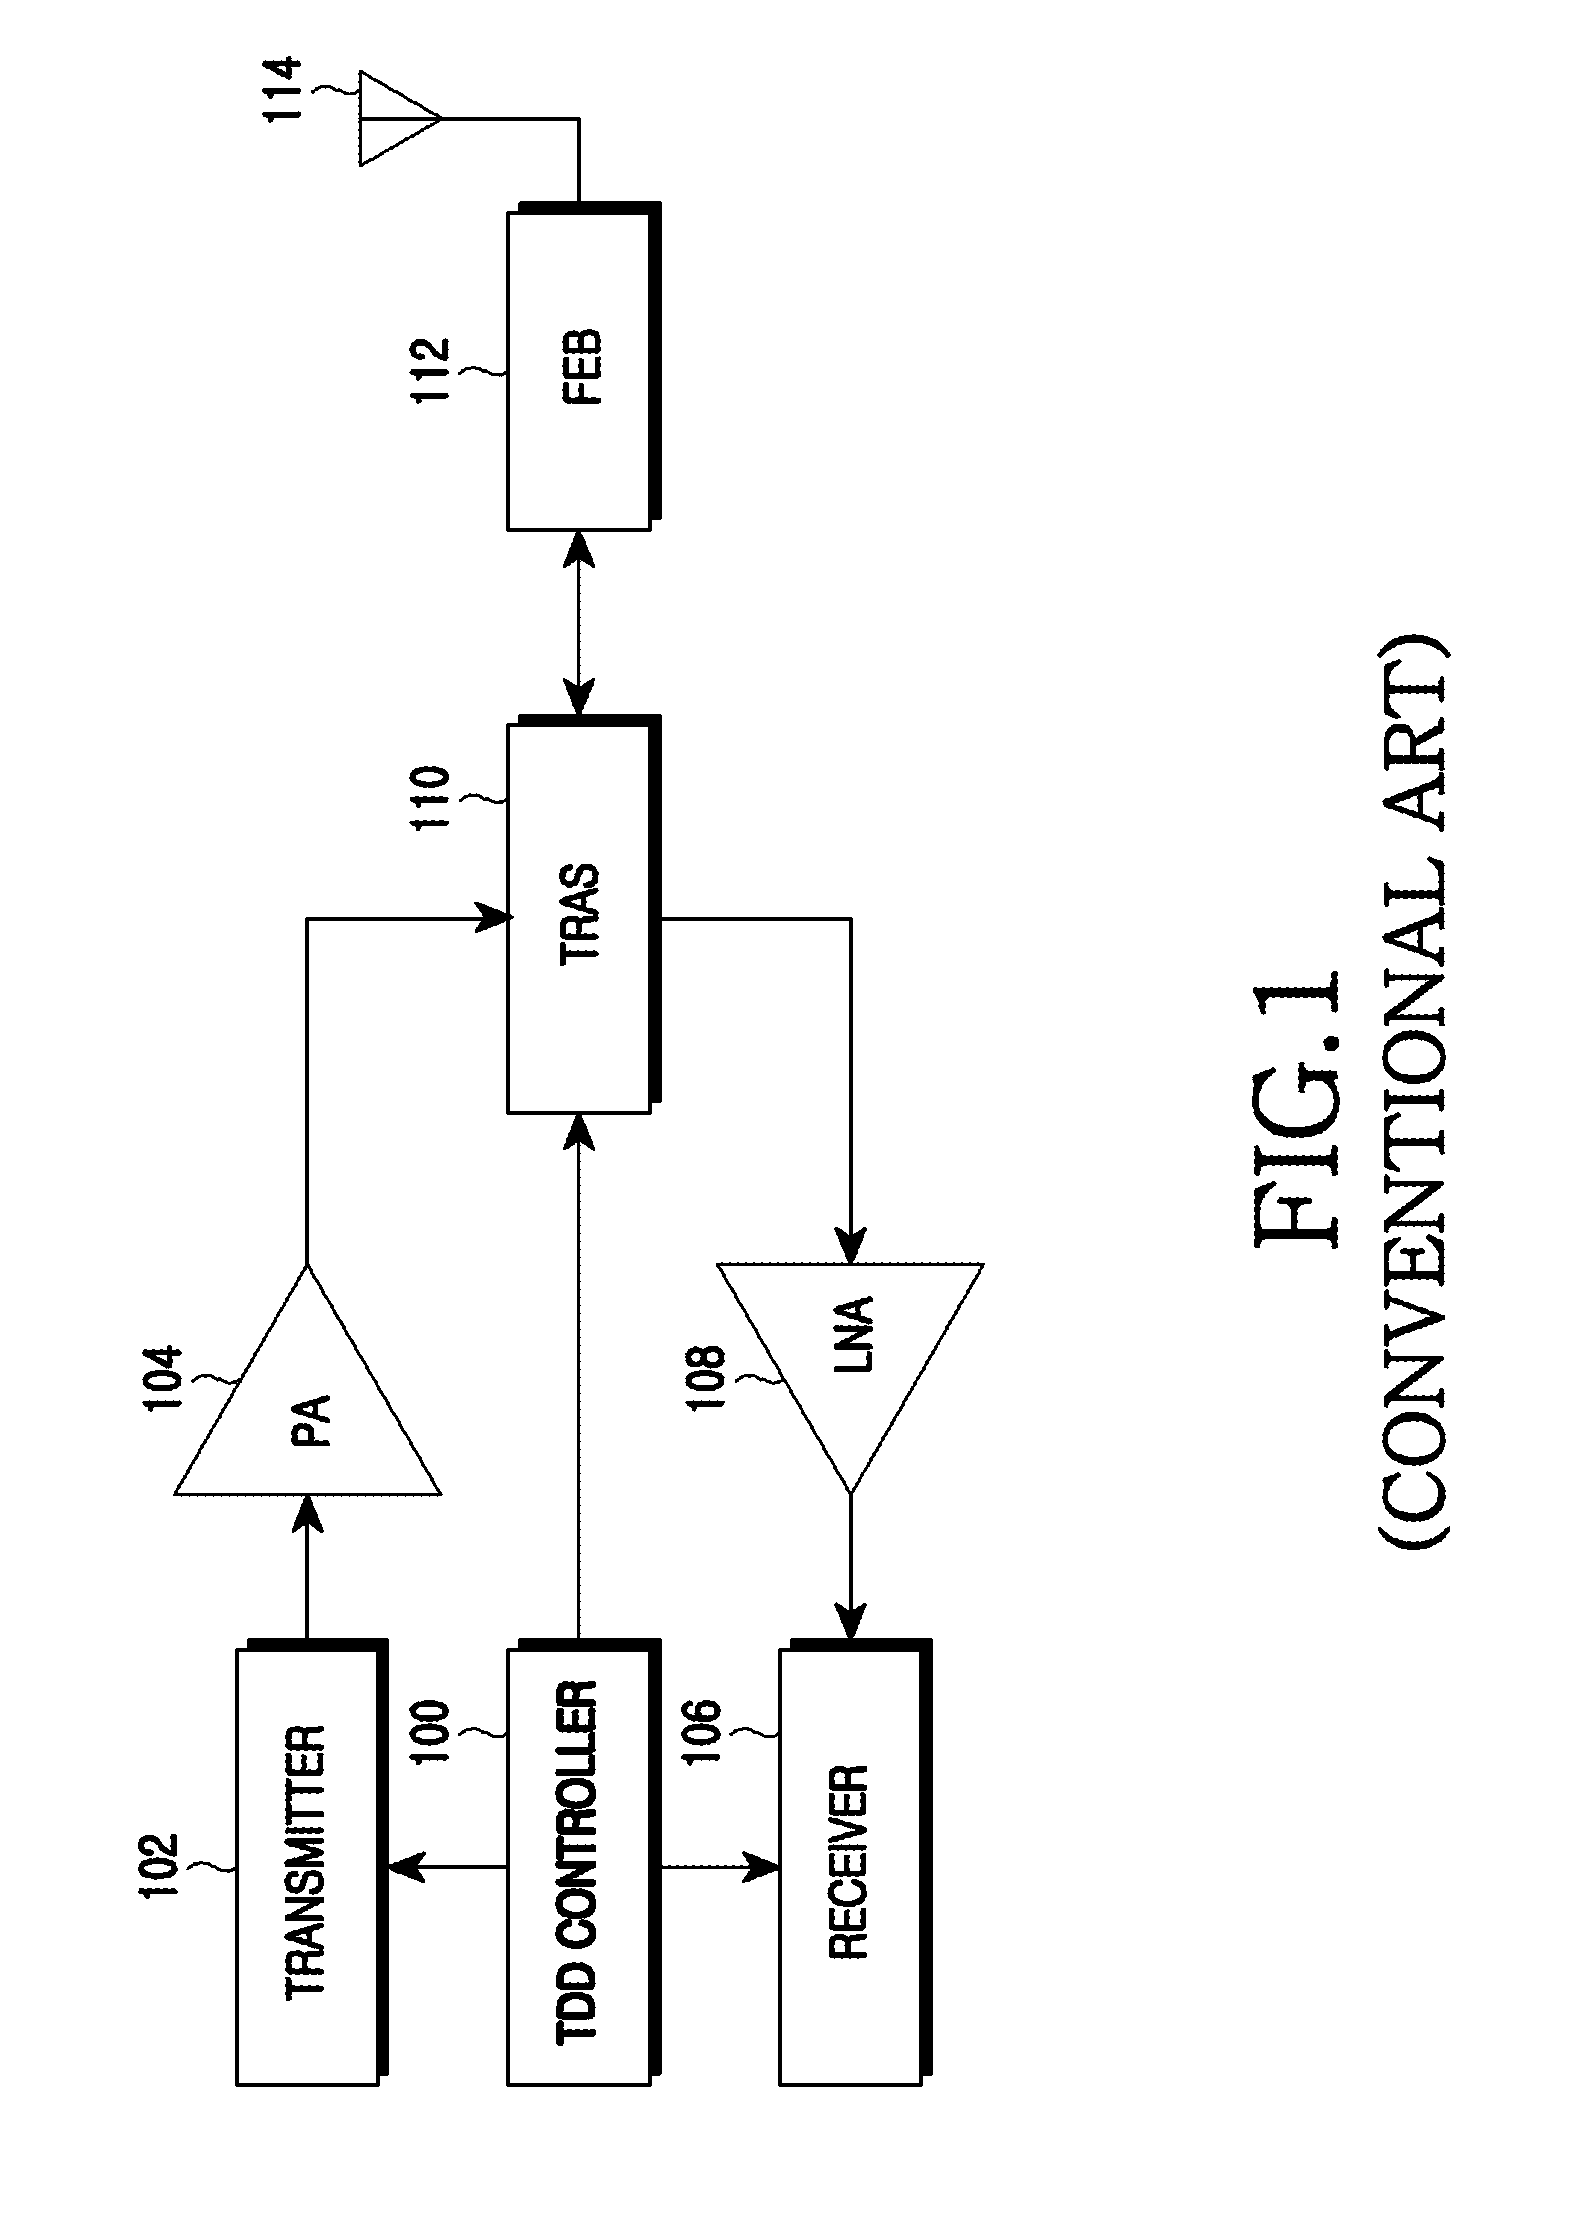 Apparatus and method for transmit/receive antenna switch in a TDD wireless communication system